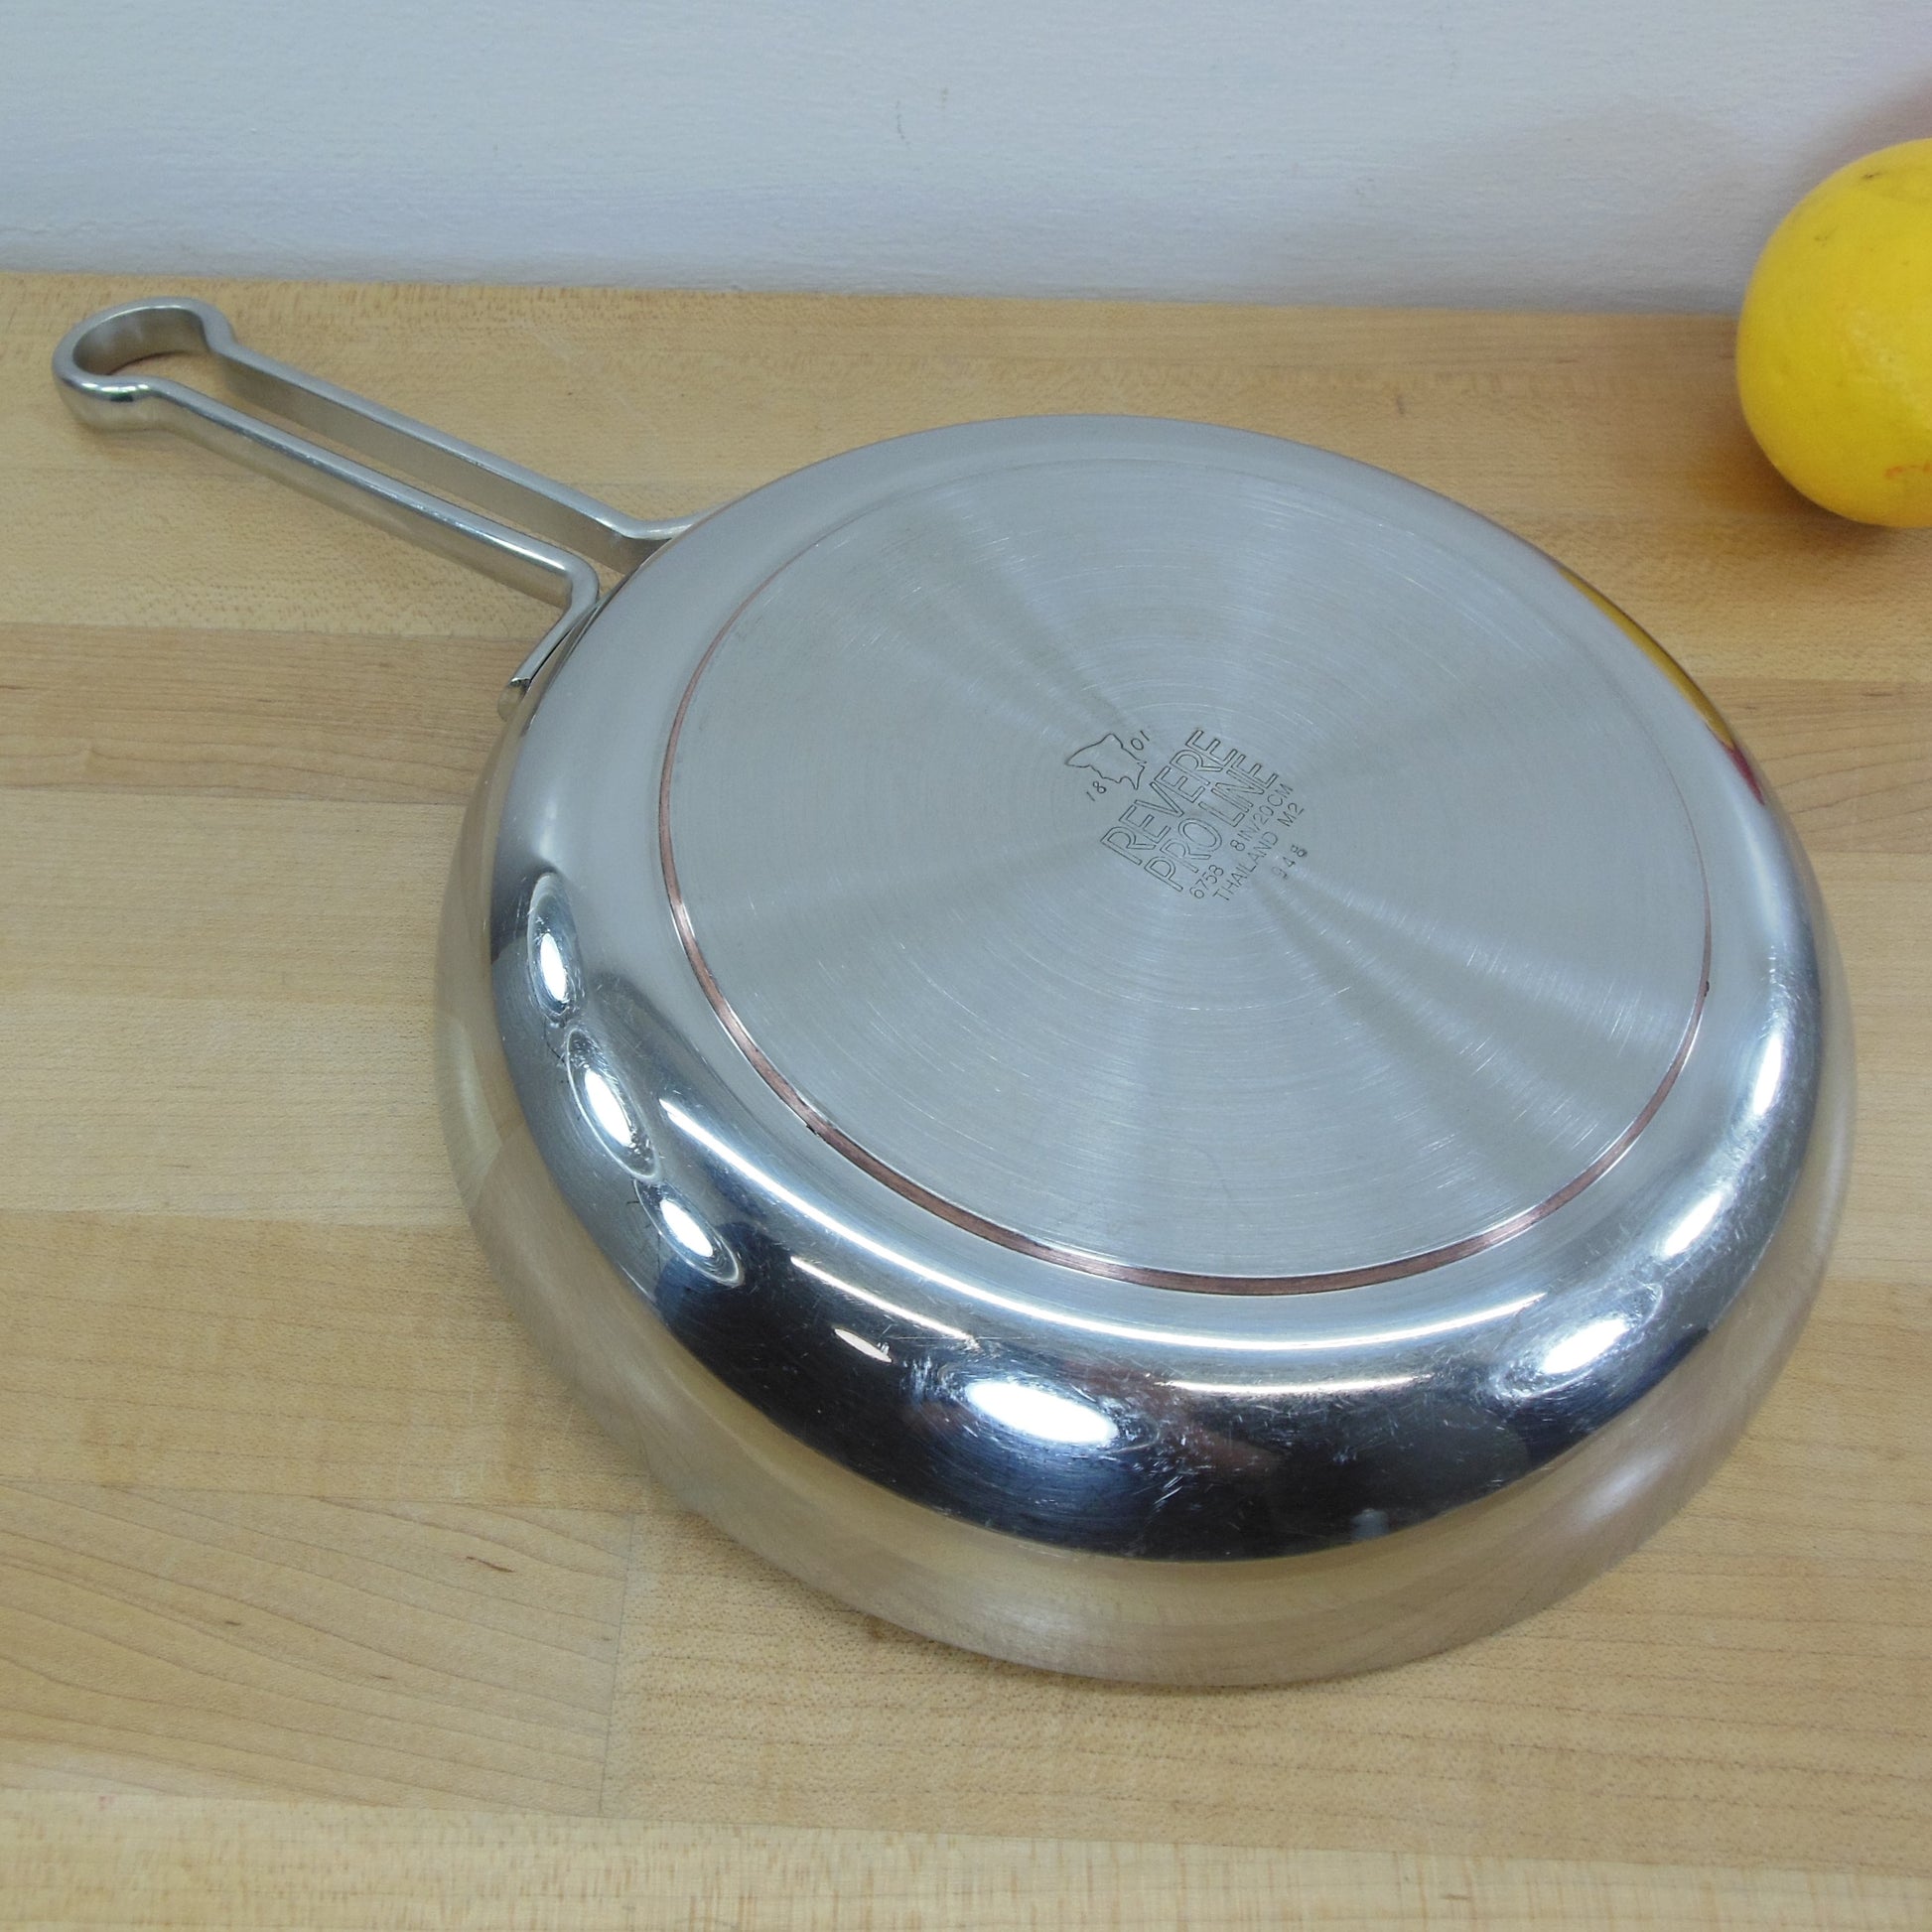 Revere Ware Pro-Line Stainless 8" Fry Pan Skillet 6758 Vintage